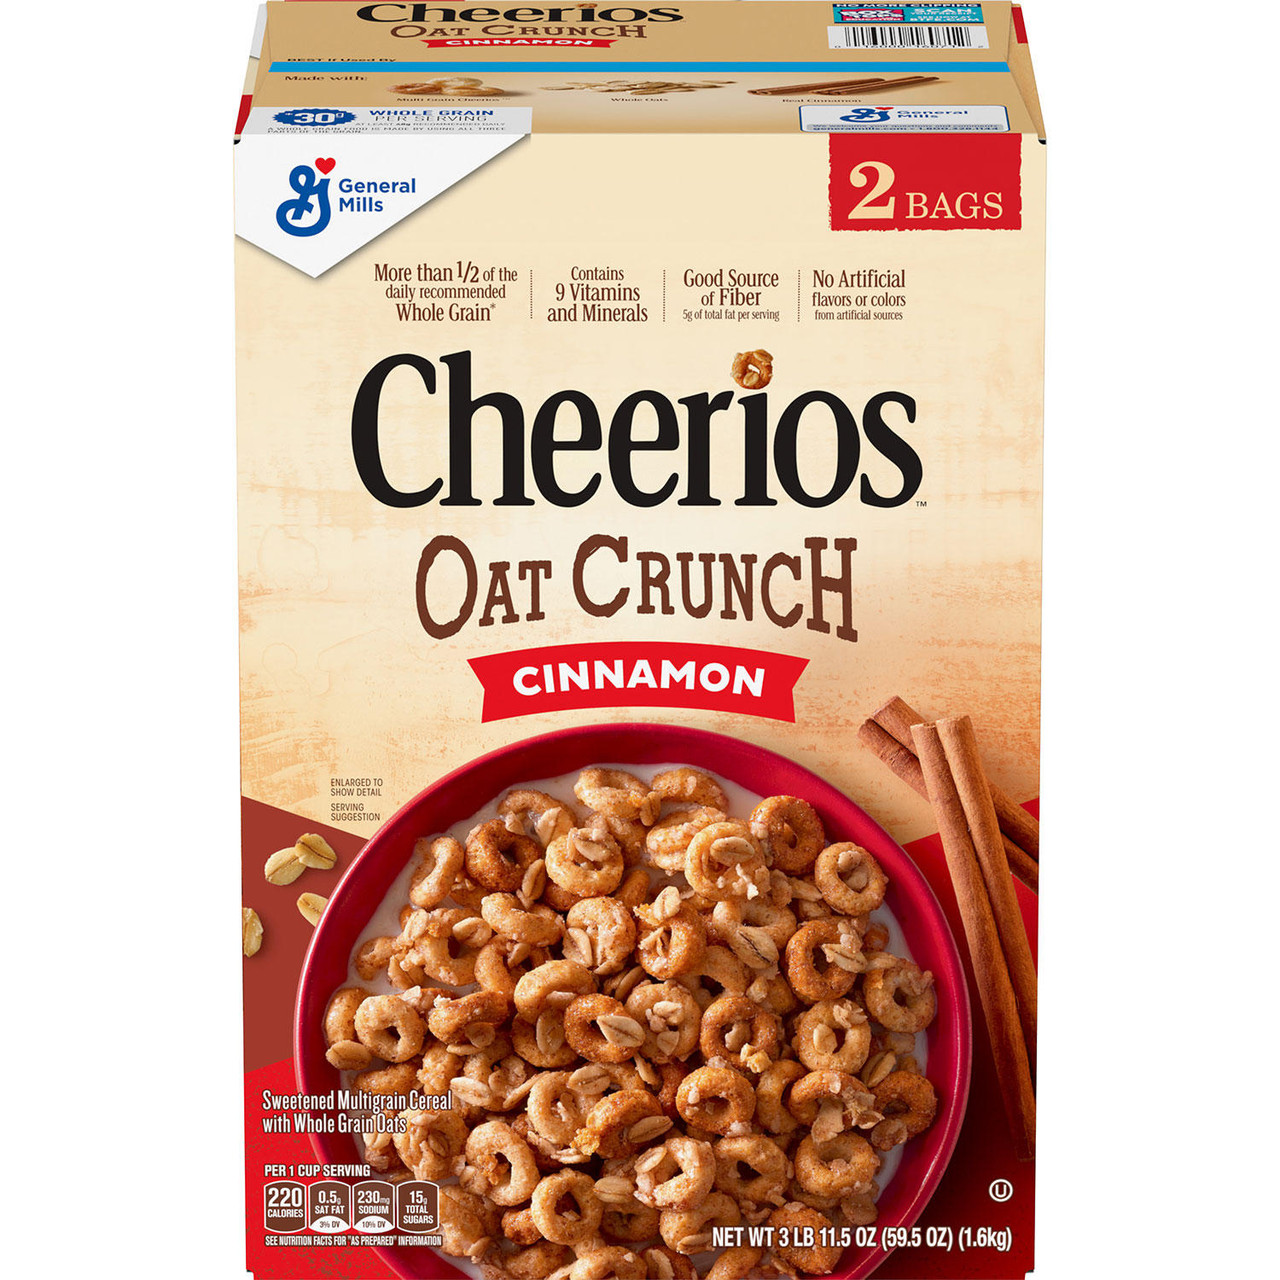 Cheerios Oat Crunch, Cinnamon (59.5 oz.) - [From 42.00 - Choose pk Qty ] - *Ships from Miami